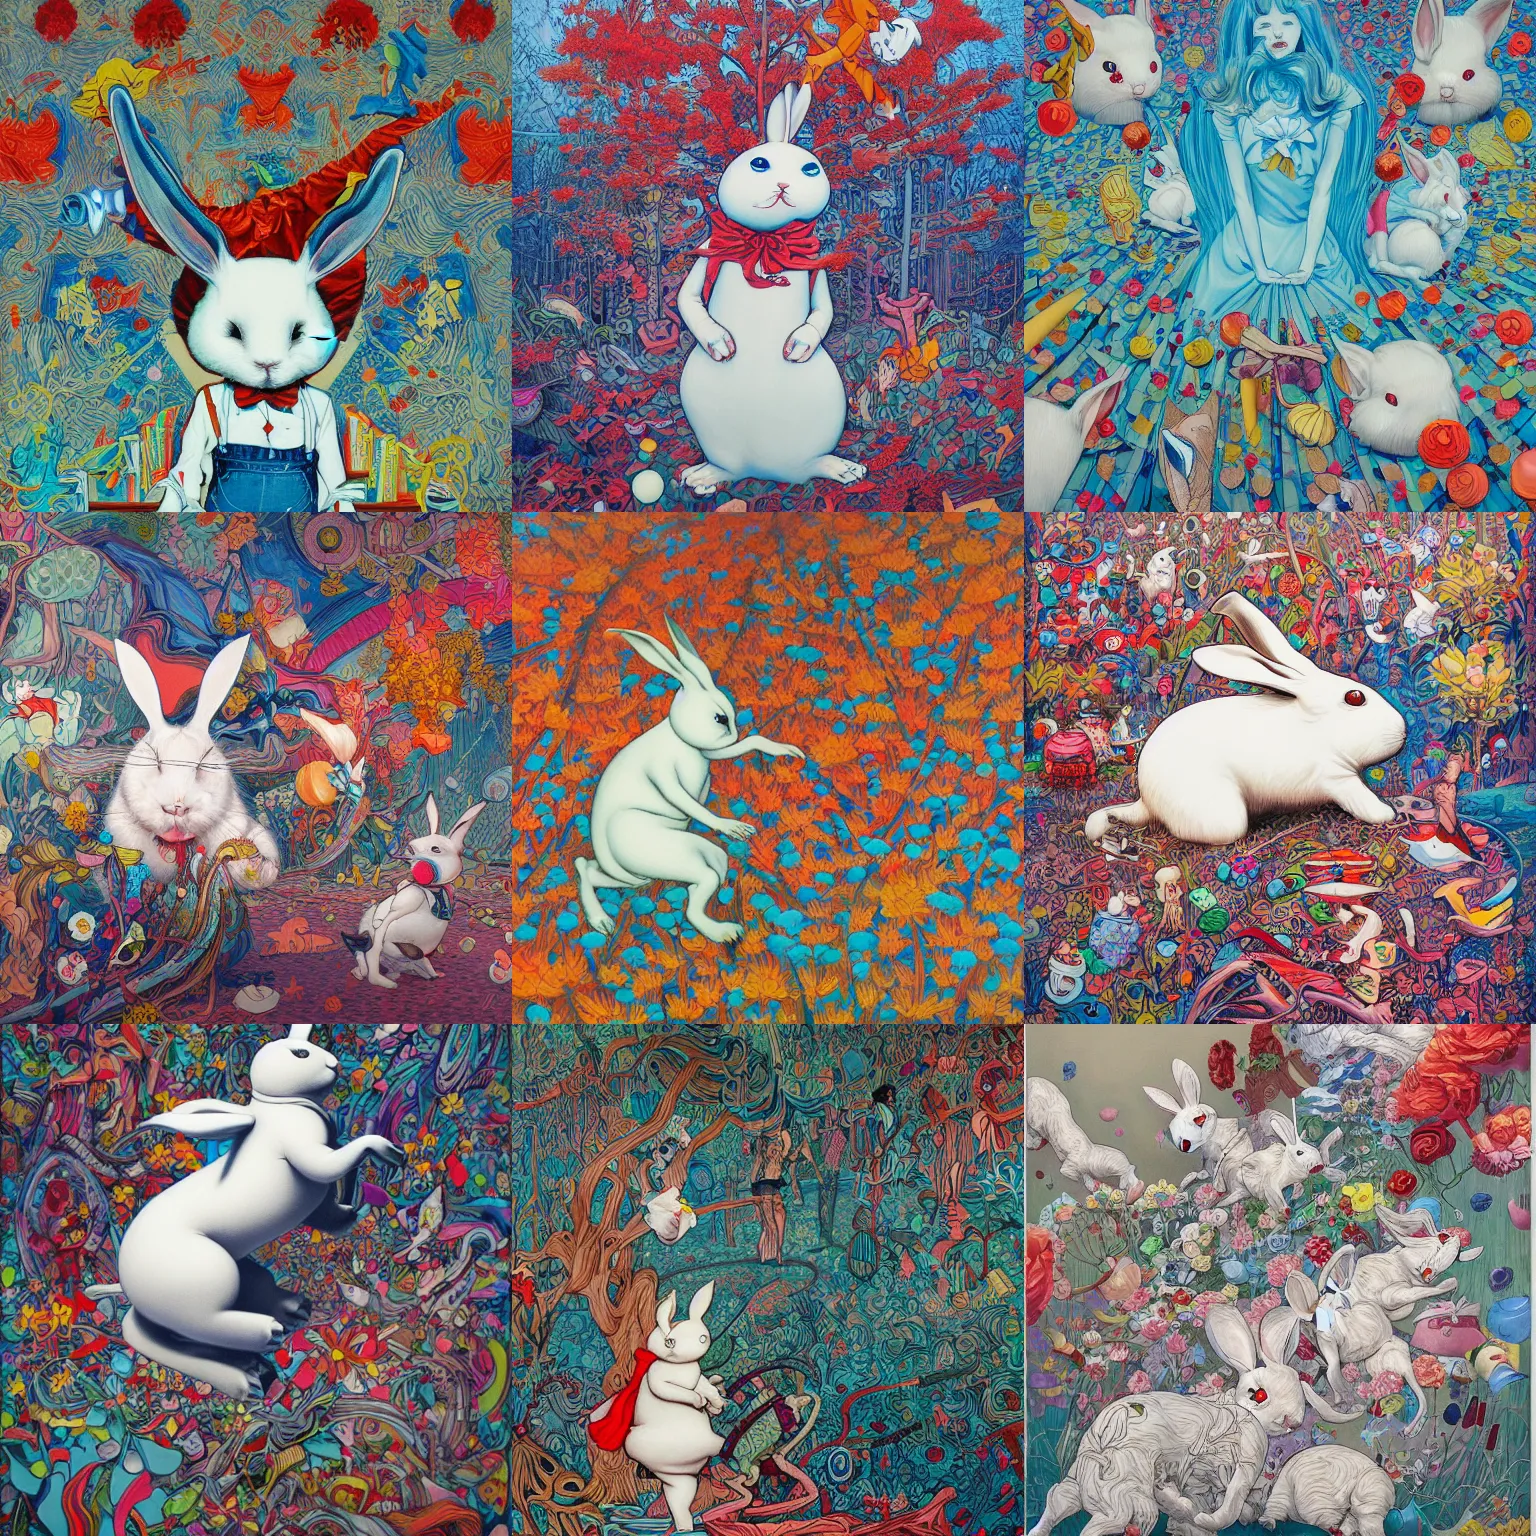 Prompt: chasing the white rabbit by james jean, oil on canvas, vivid, colorful